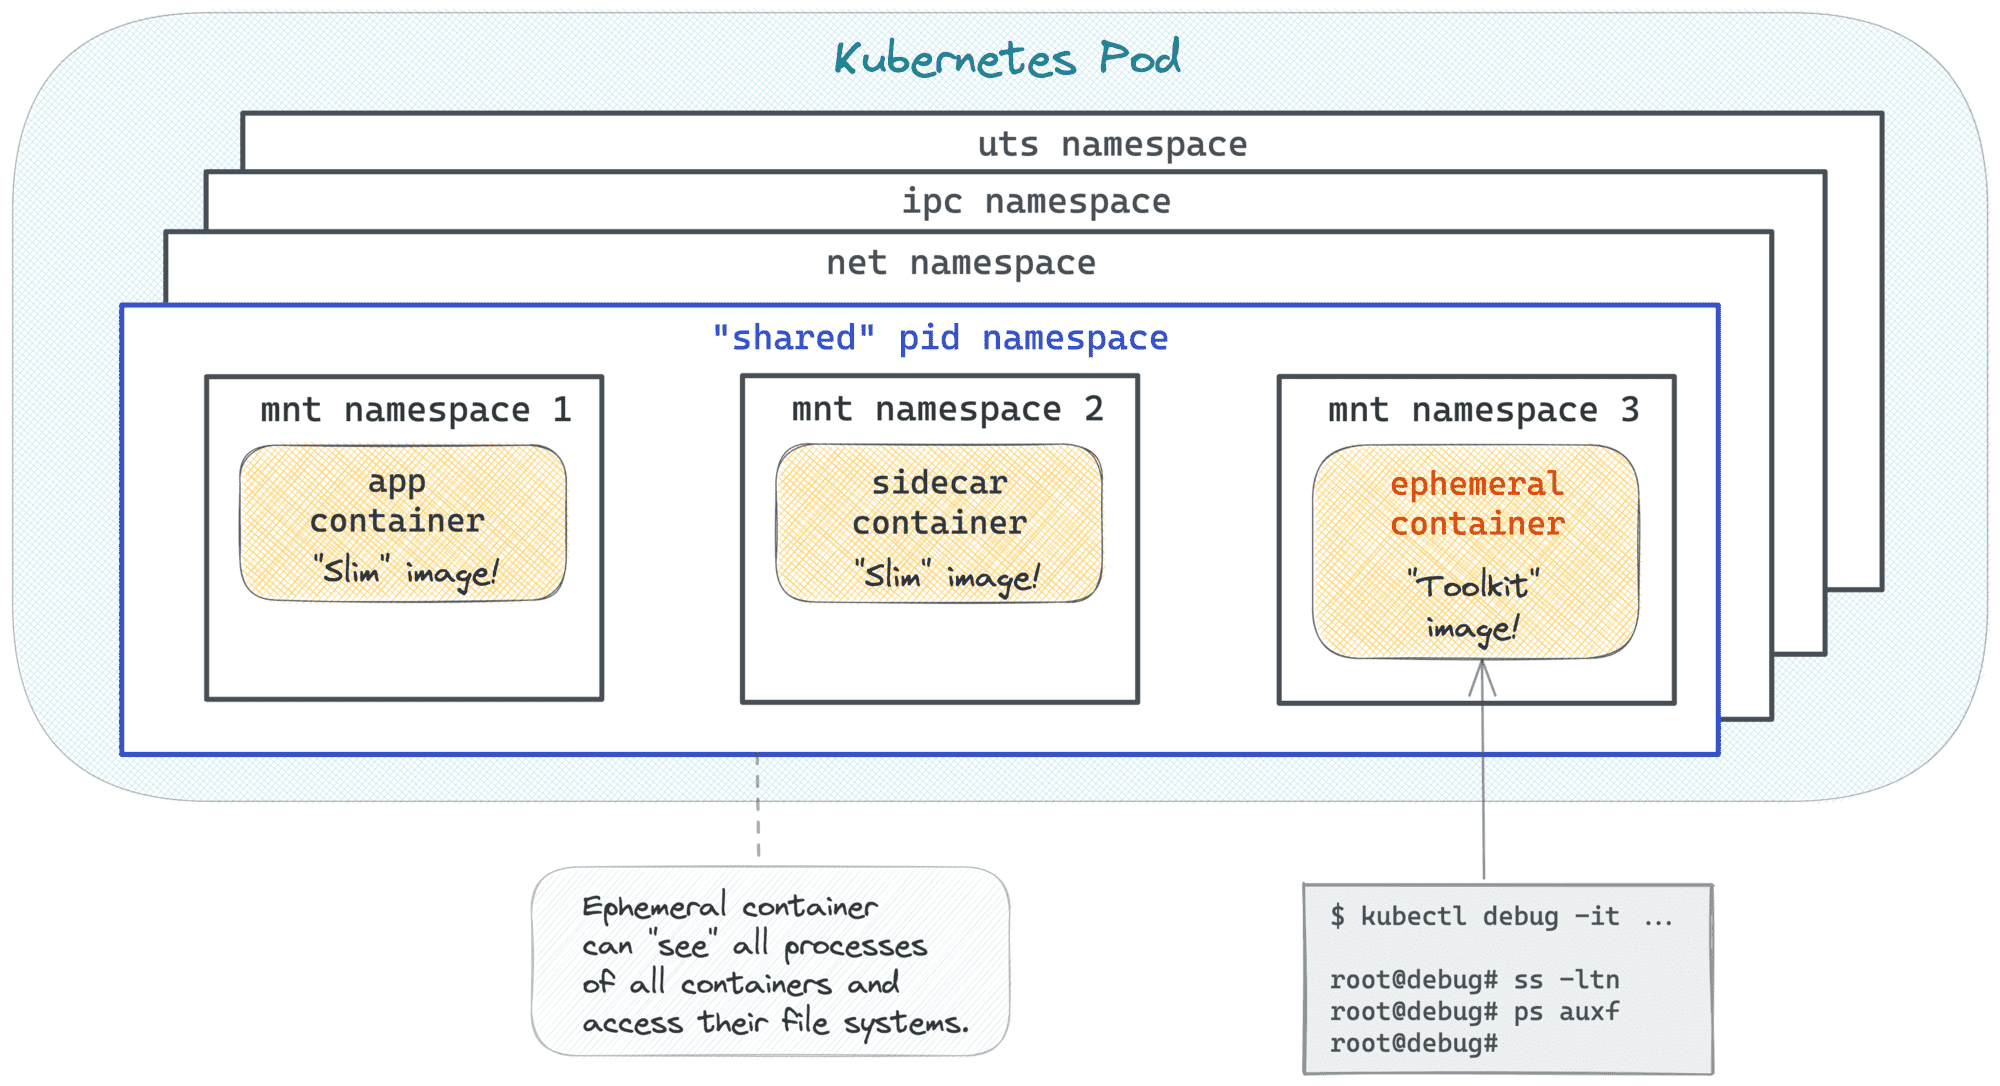 Kubernetes Ephemeral Container using shared pid namespace.